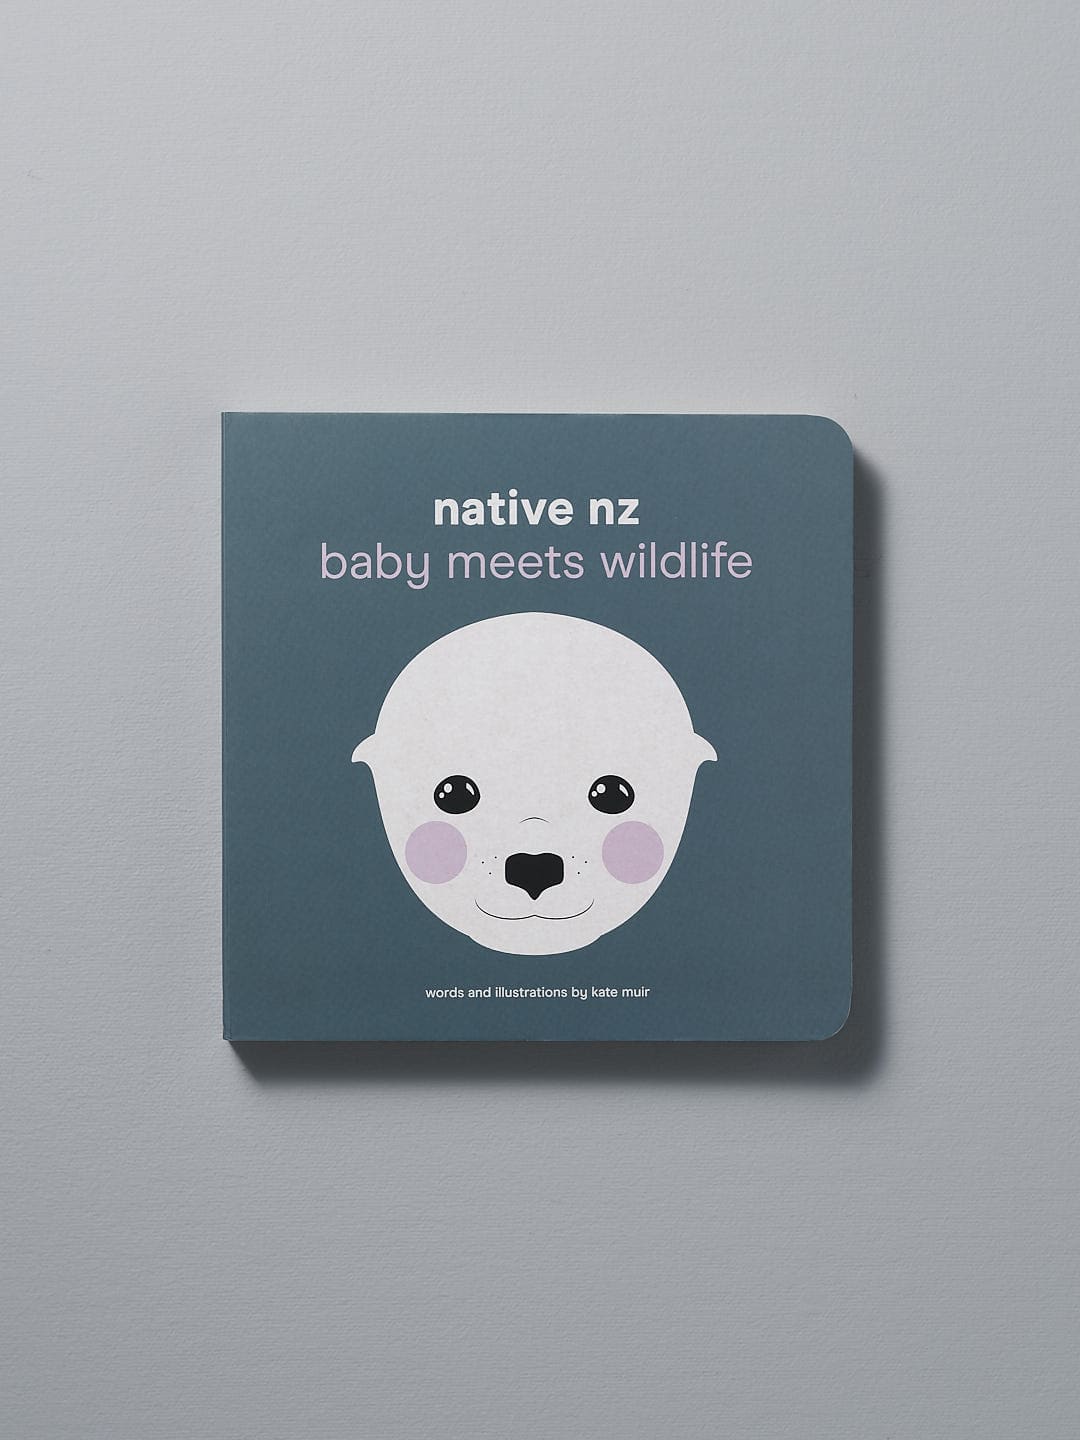 A board book titled &quot;Native NZ Baby Meets Wildlife&quot; by Kate Muir with an illustration of a stylized animal on the cover.